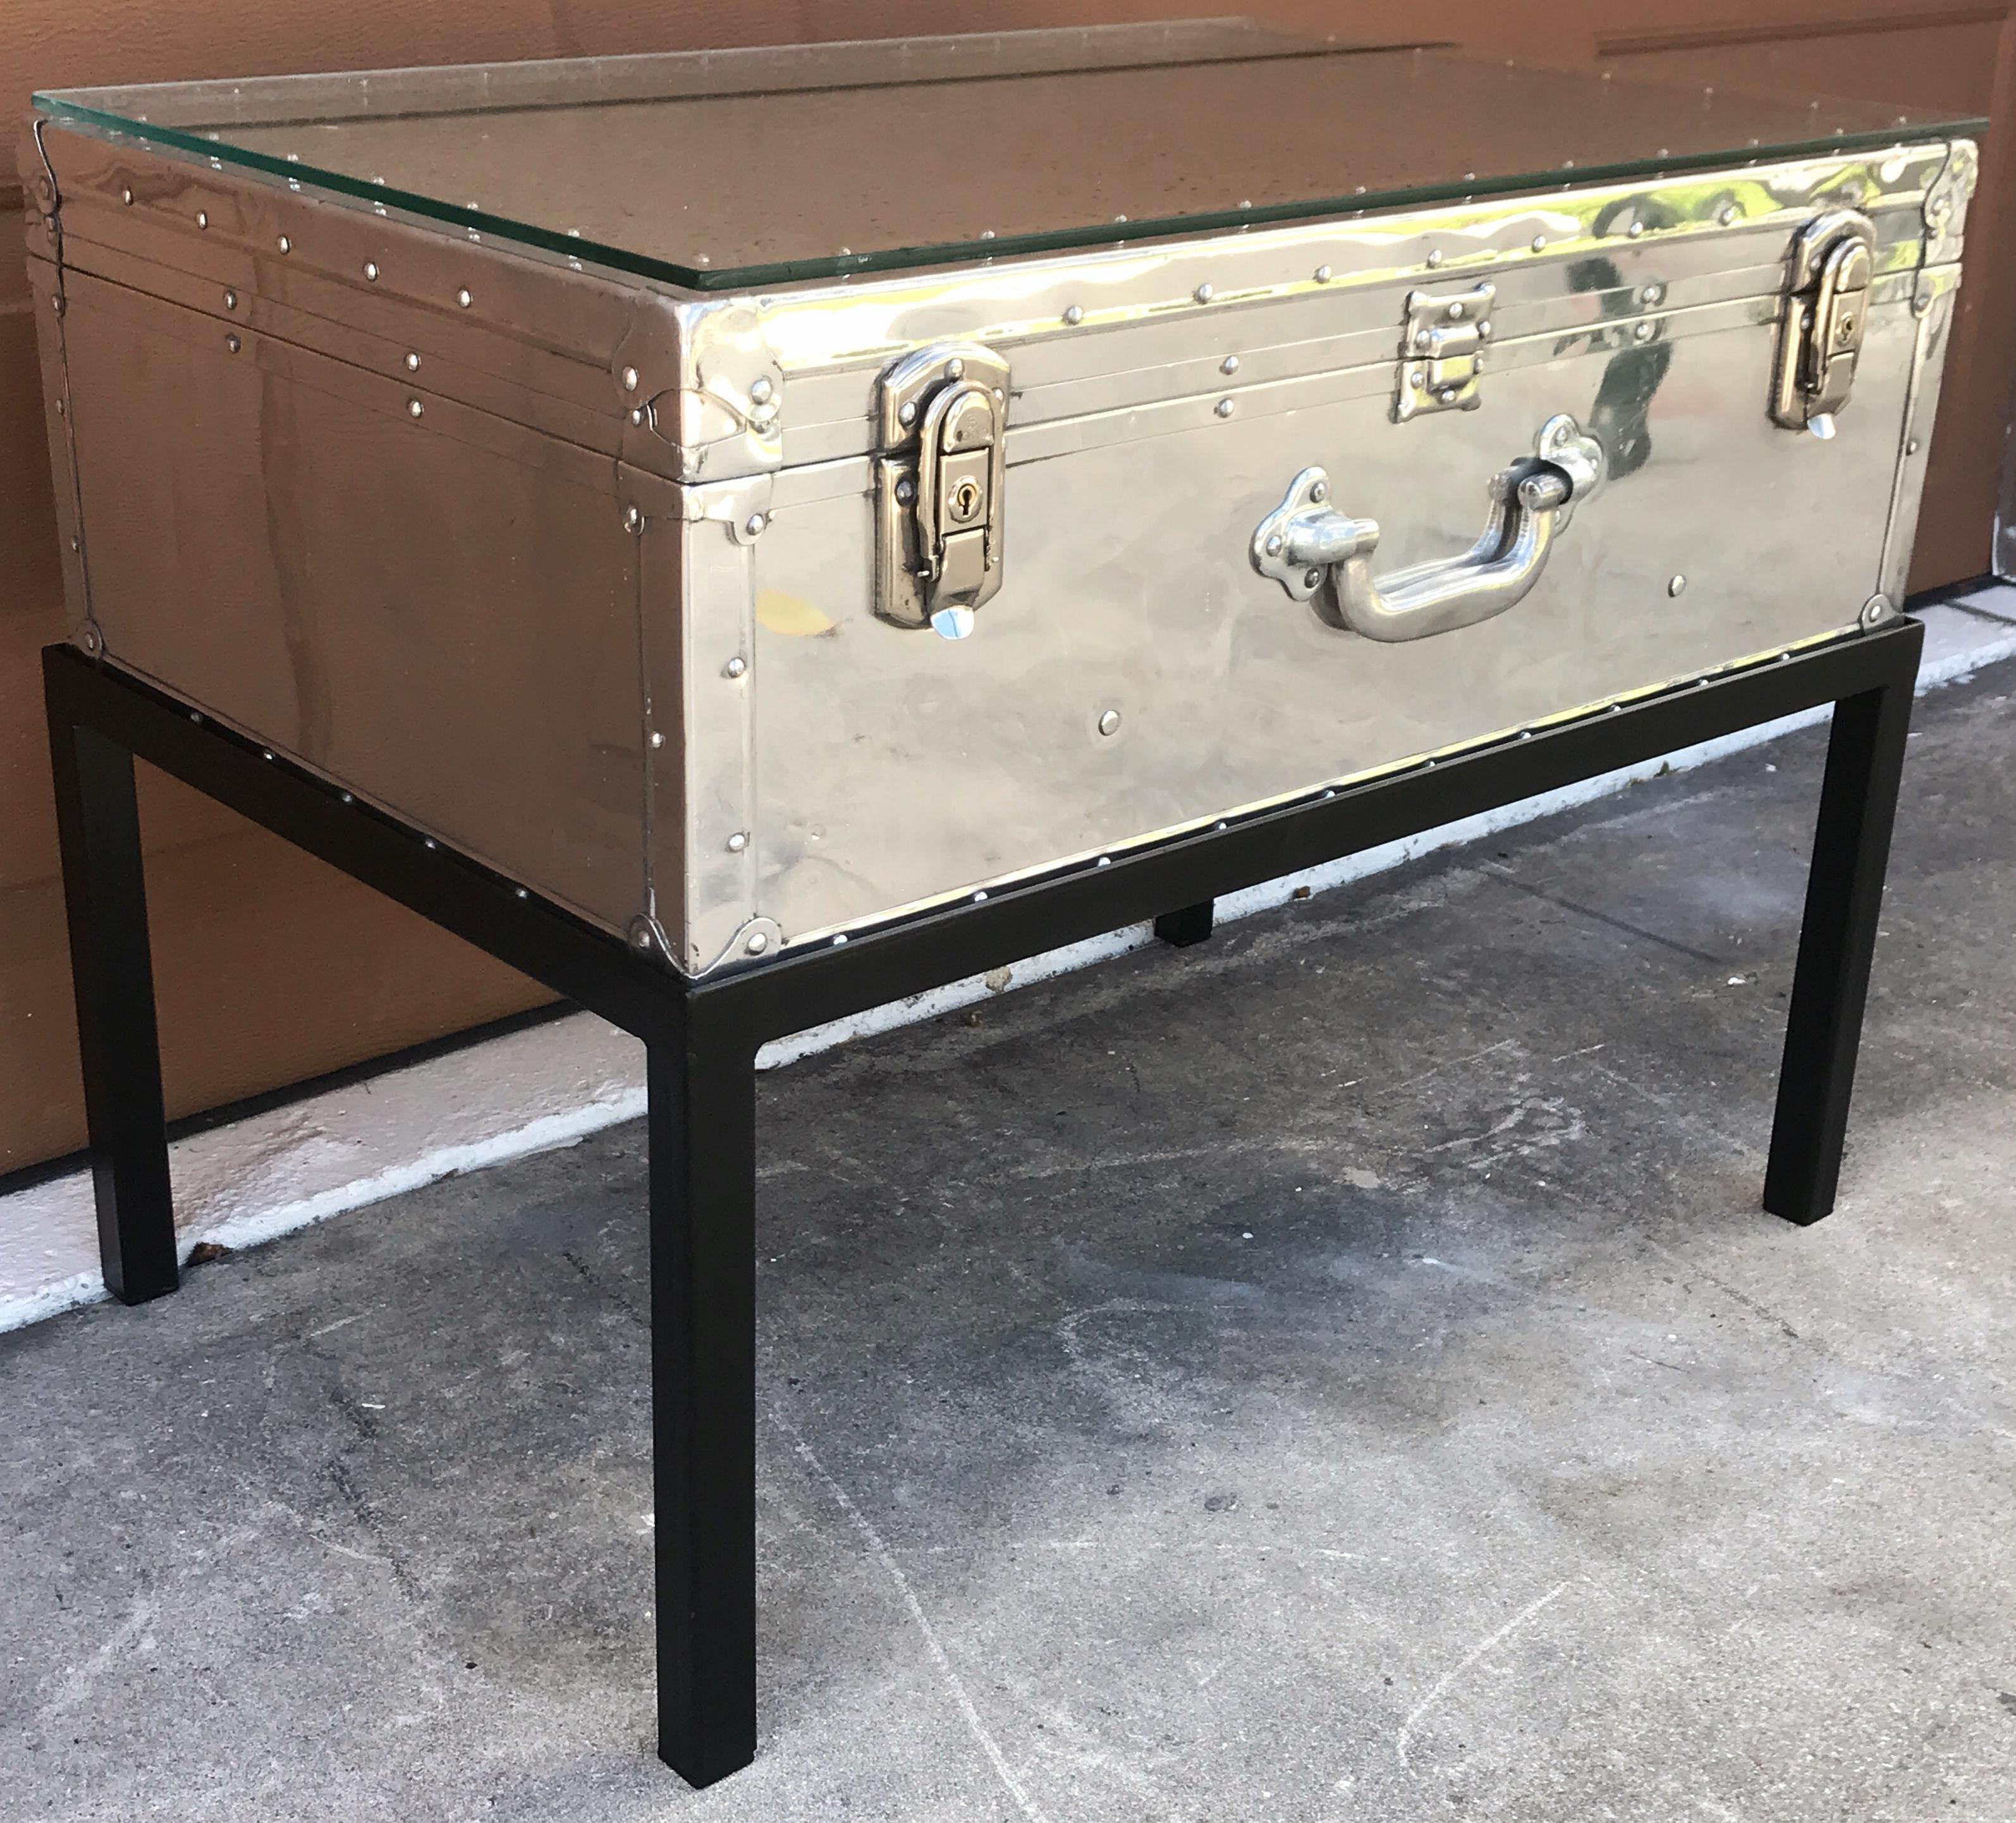 Japanese Post War Aluminum Riveted Trunk on Iron Stand with Glass Top, Restored

Experience a significant piece of history in an elegant form with our Japanese post war aluminum riveted trunk. This gorgeous artifact is skillfully raised on an iron